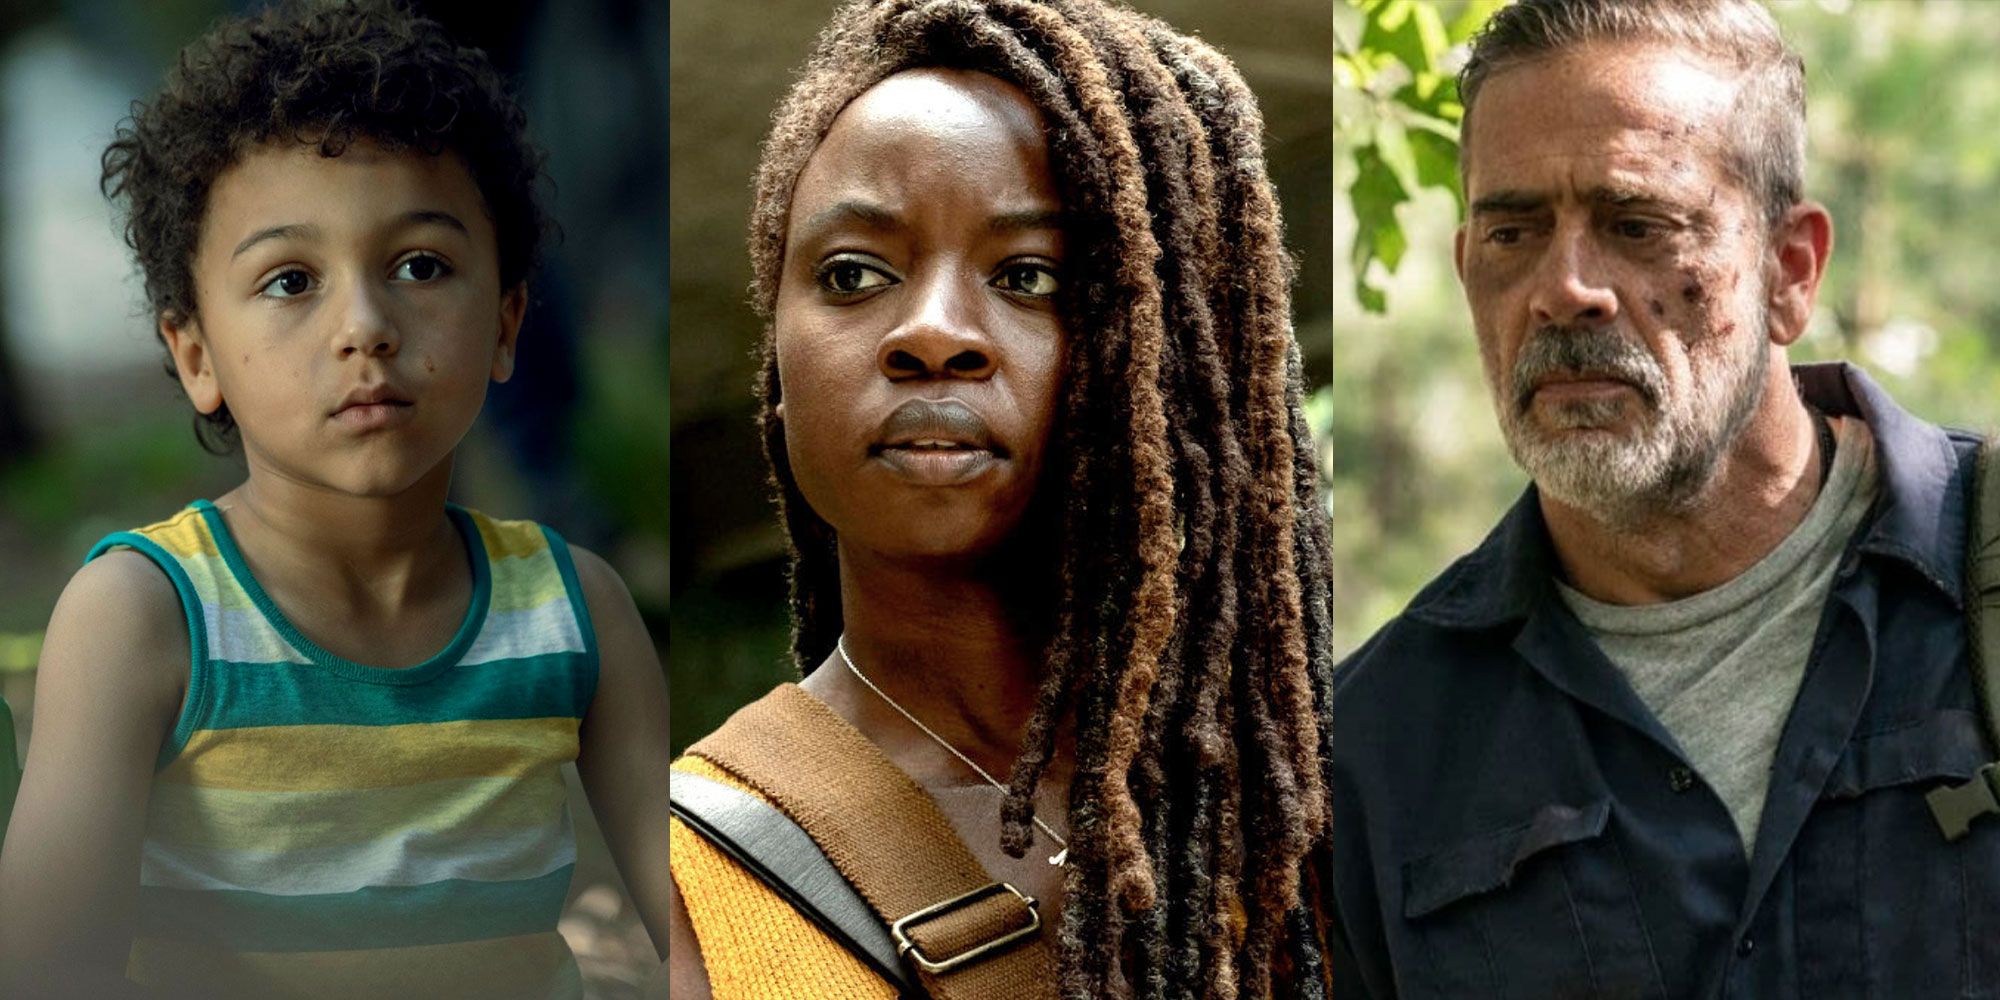 Three side by side images of characters from The Walking Dead.